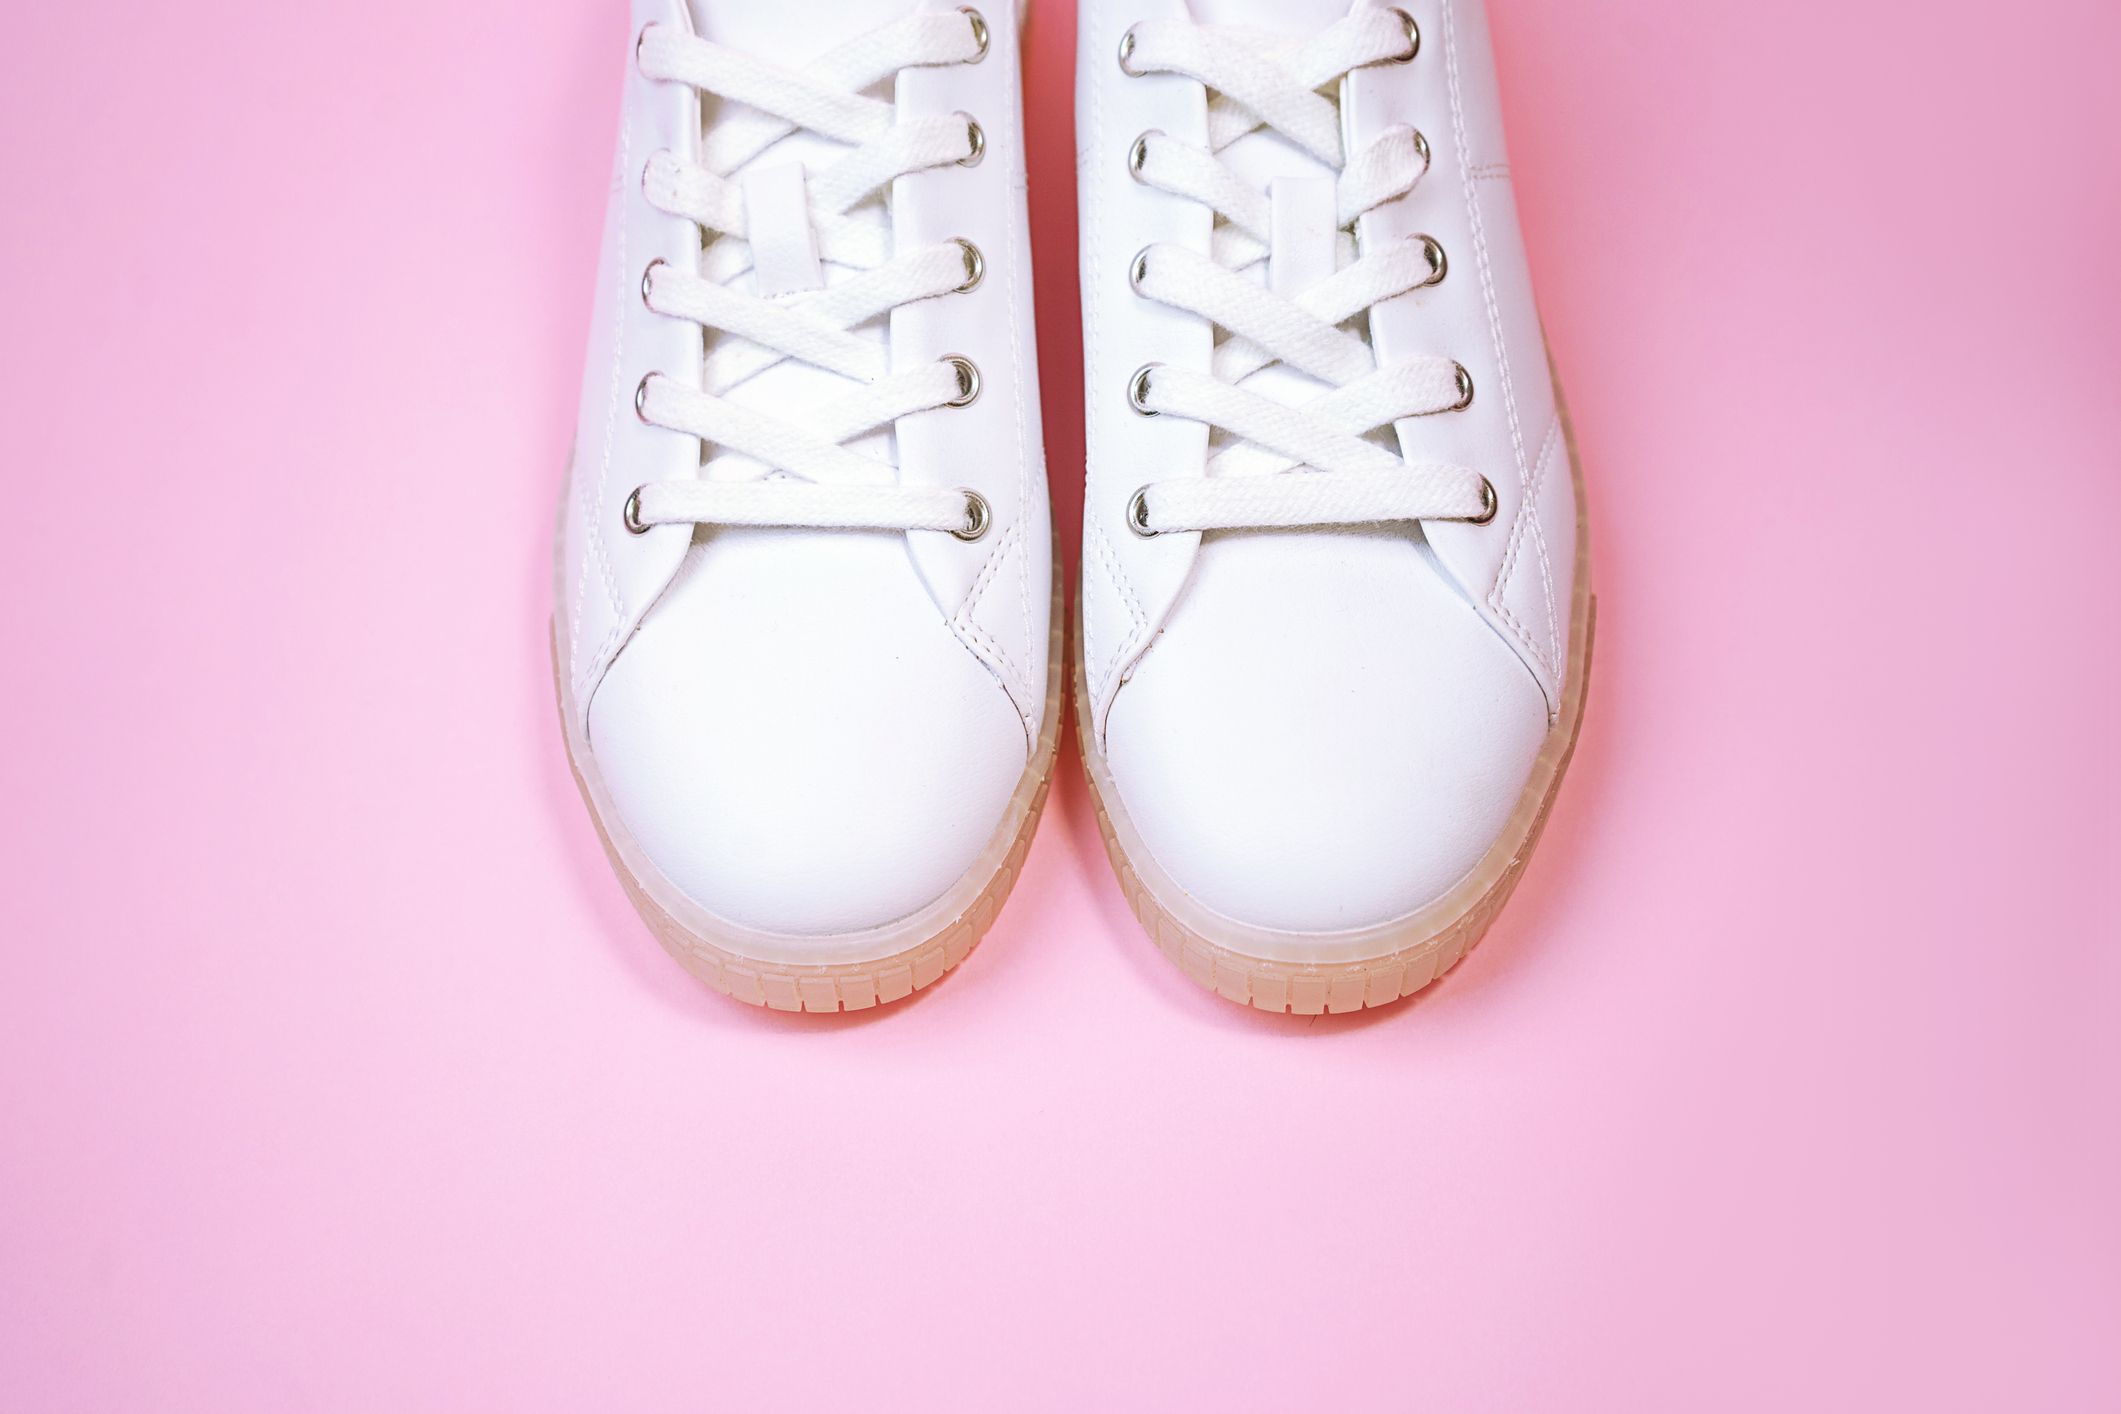 Clean White Canvas or Leather Shoes